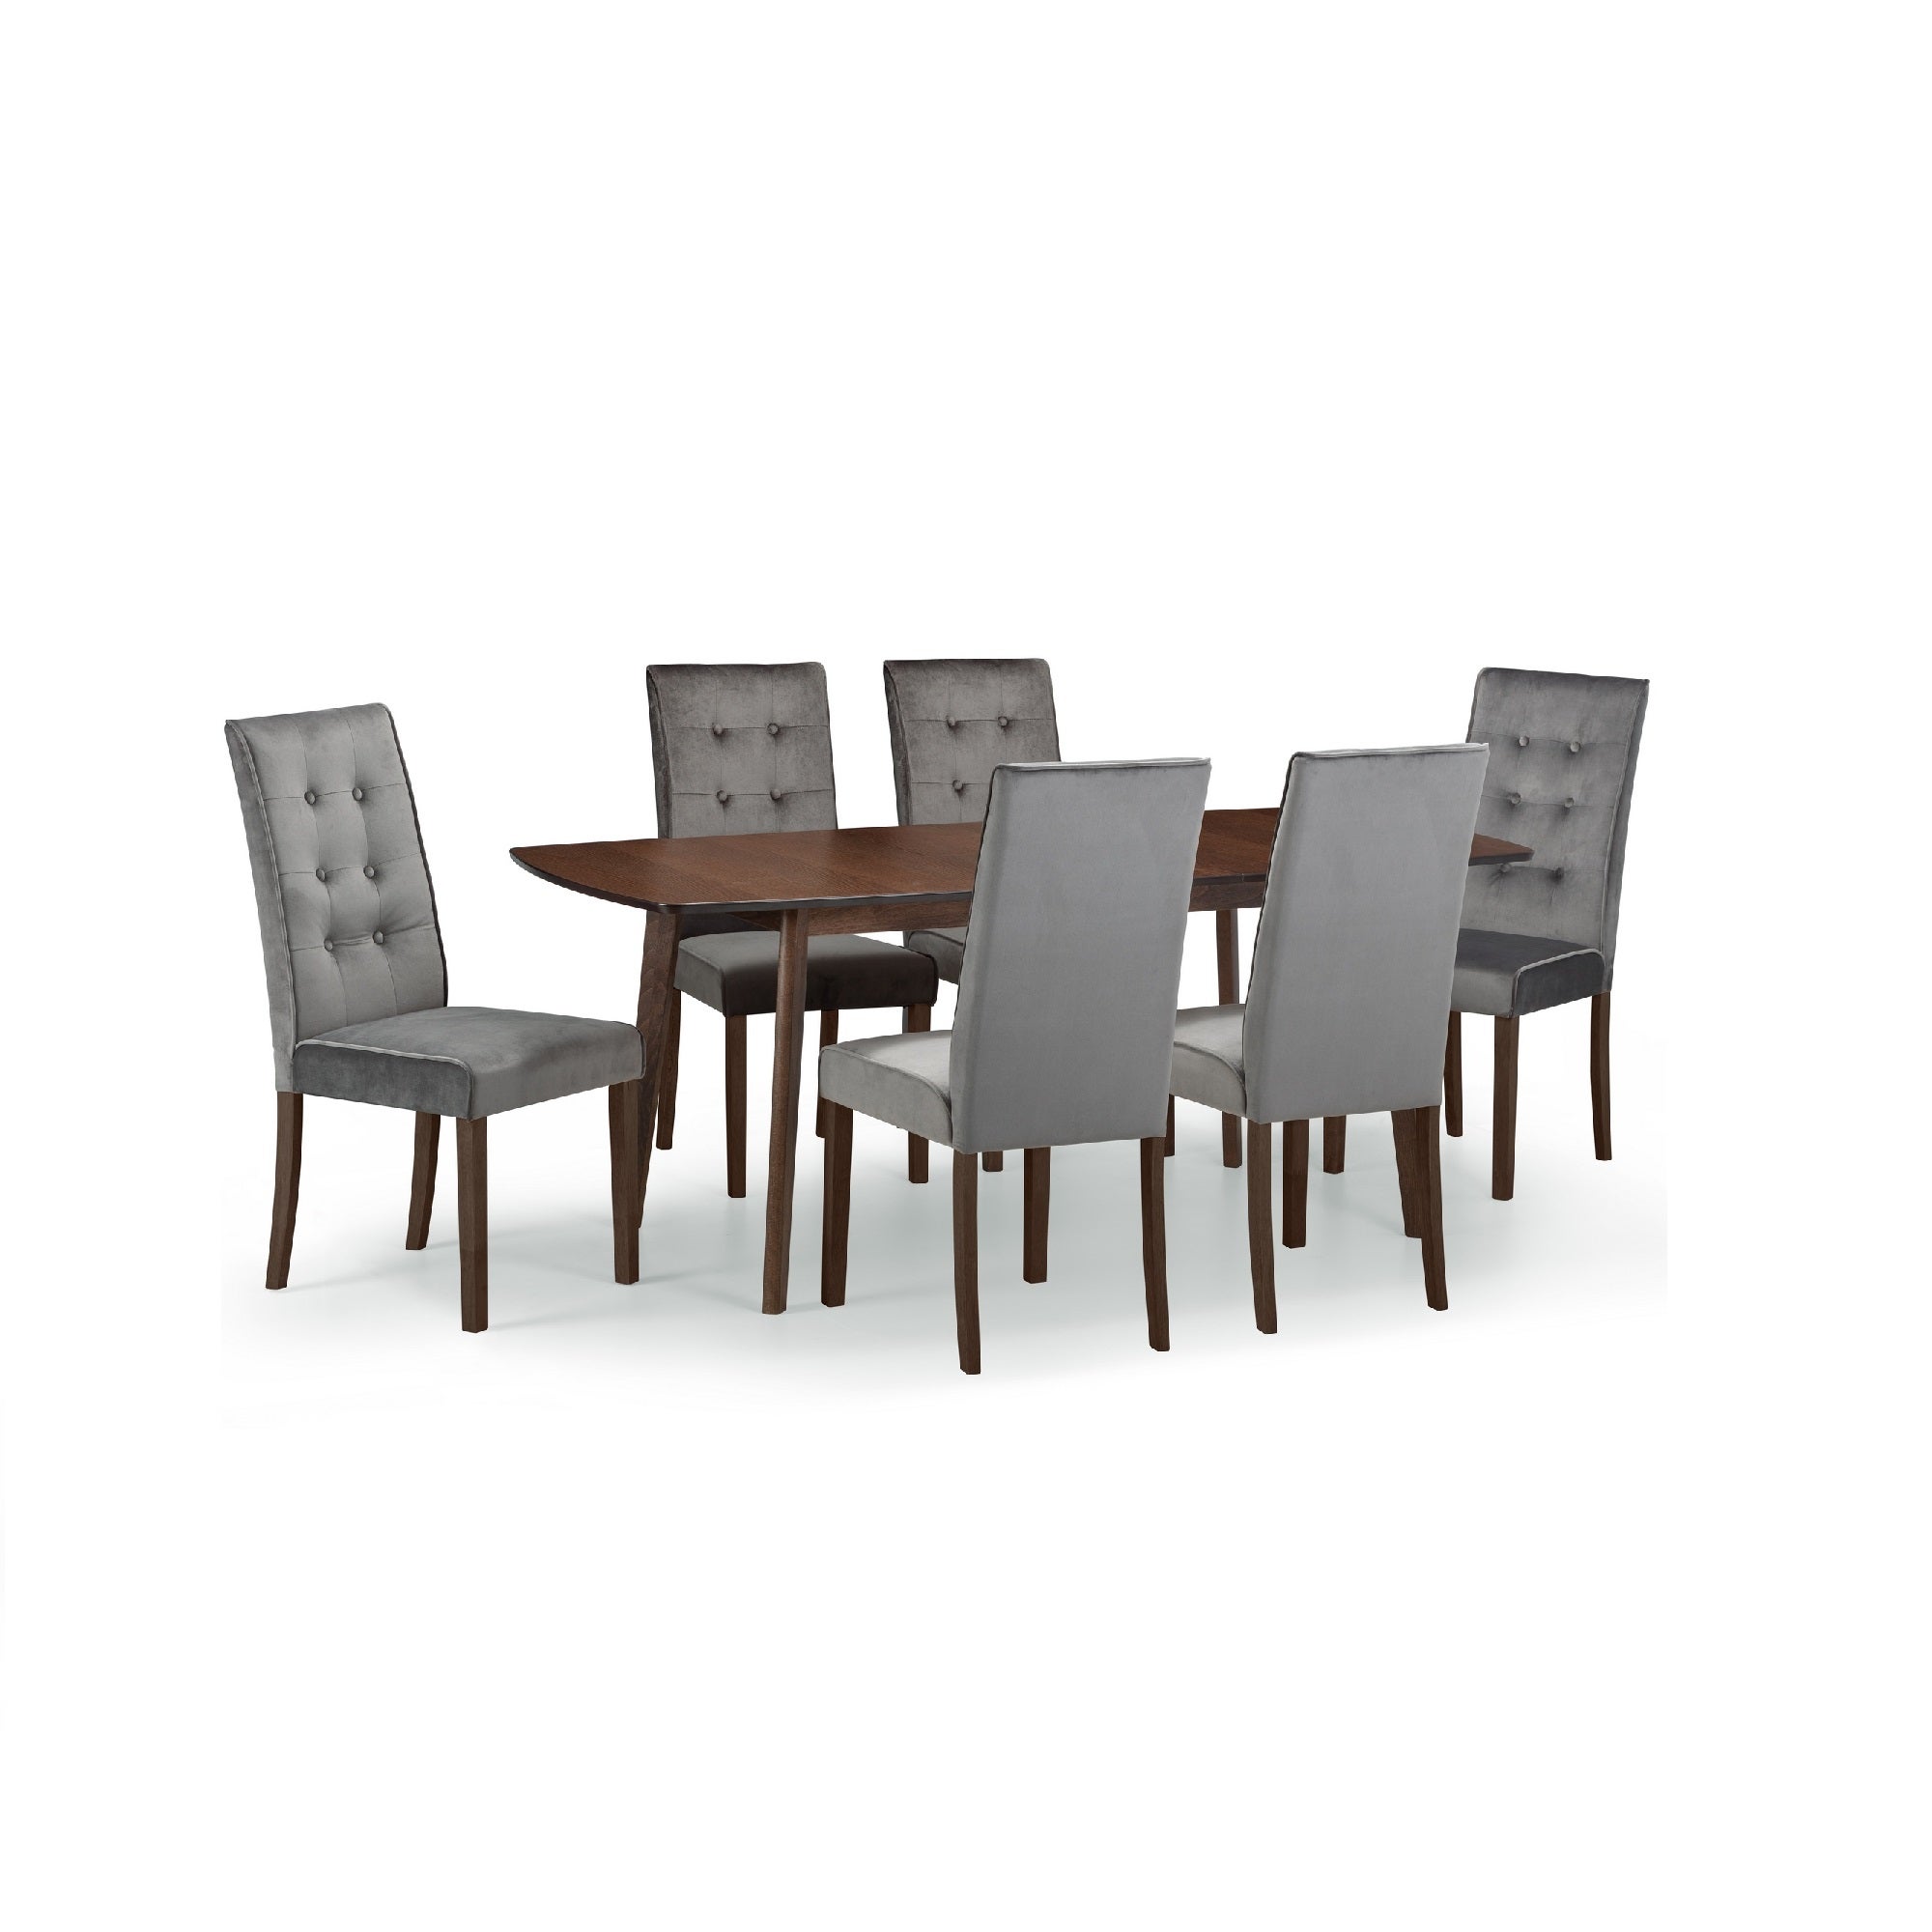 Kensington Rectangular Extendable Dining Table with 6 Madrid Chairs, Beech Wood